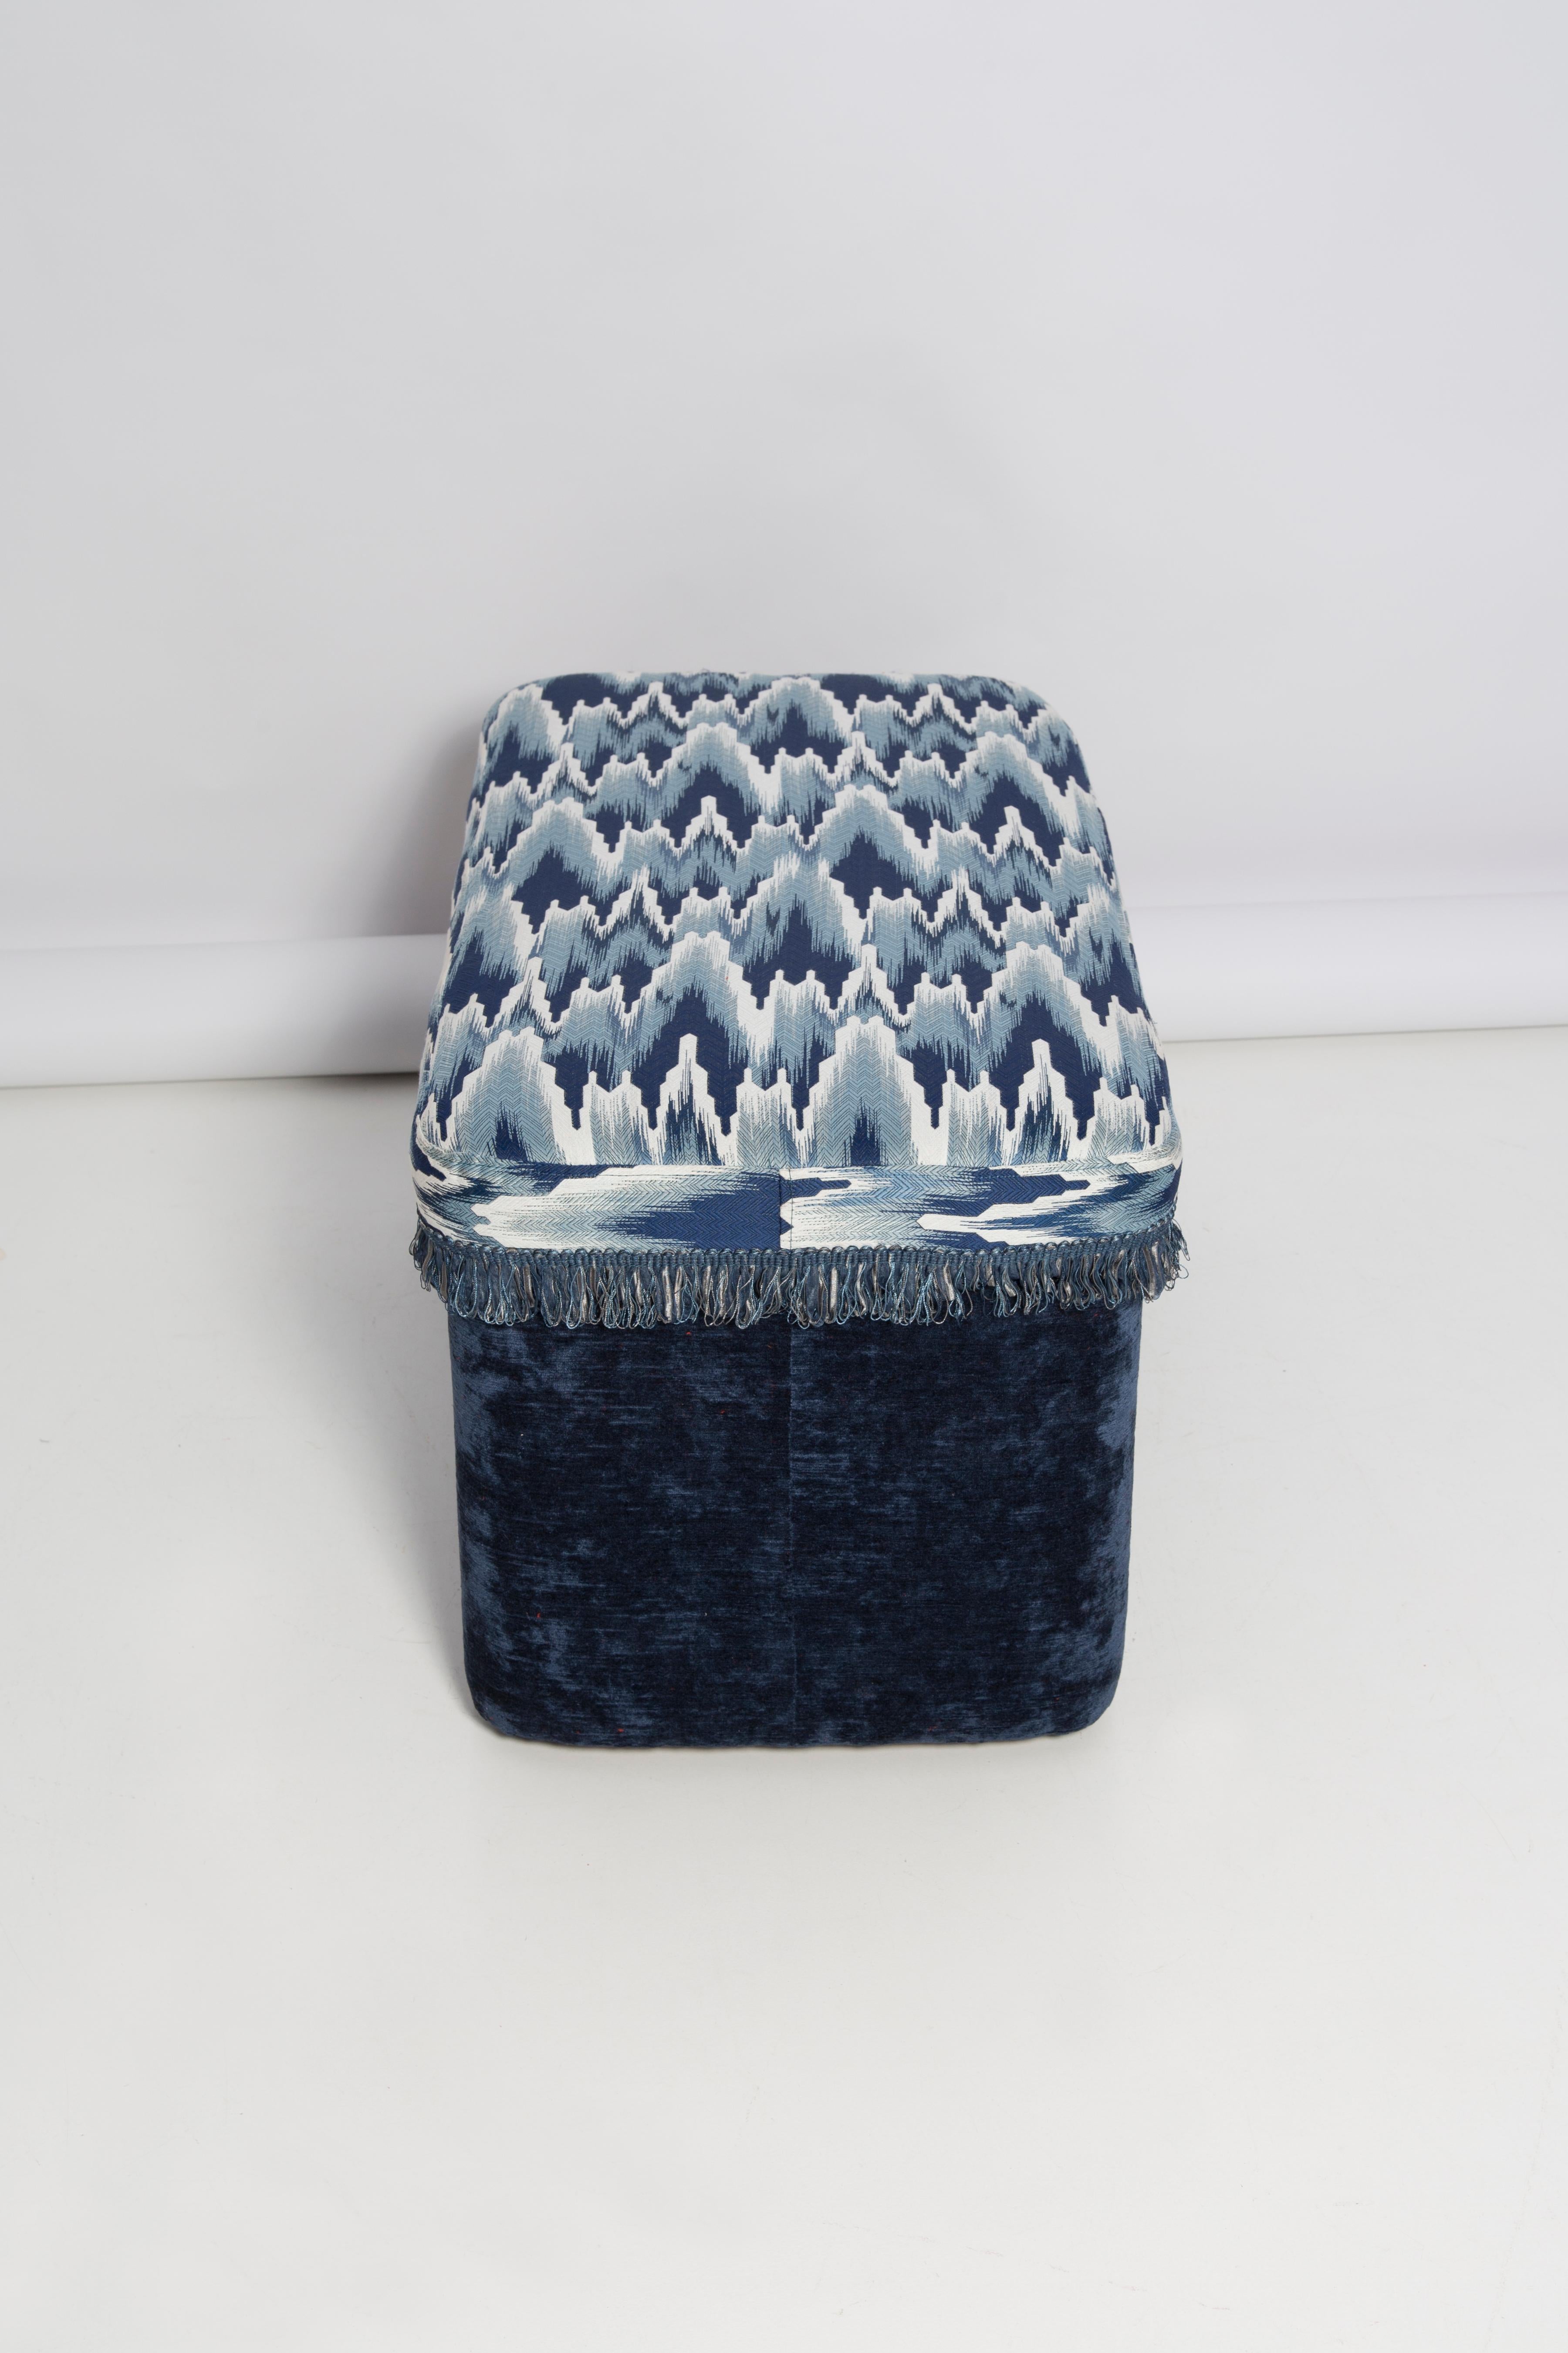 Hand-Painted Bench Pouffe with Box, Blue Fandango Jacquard, by Vintola Studio, Europe, Poland For Sale